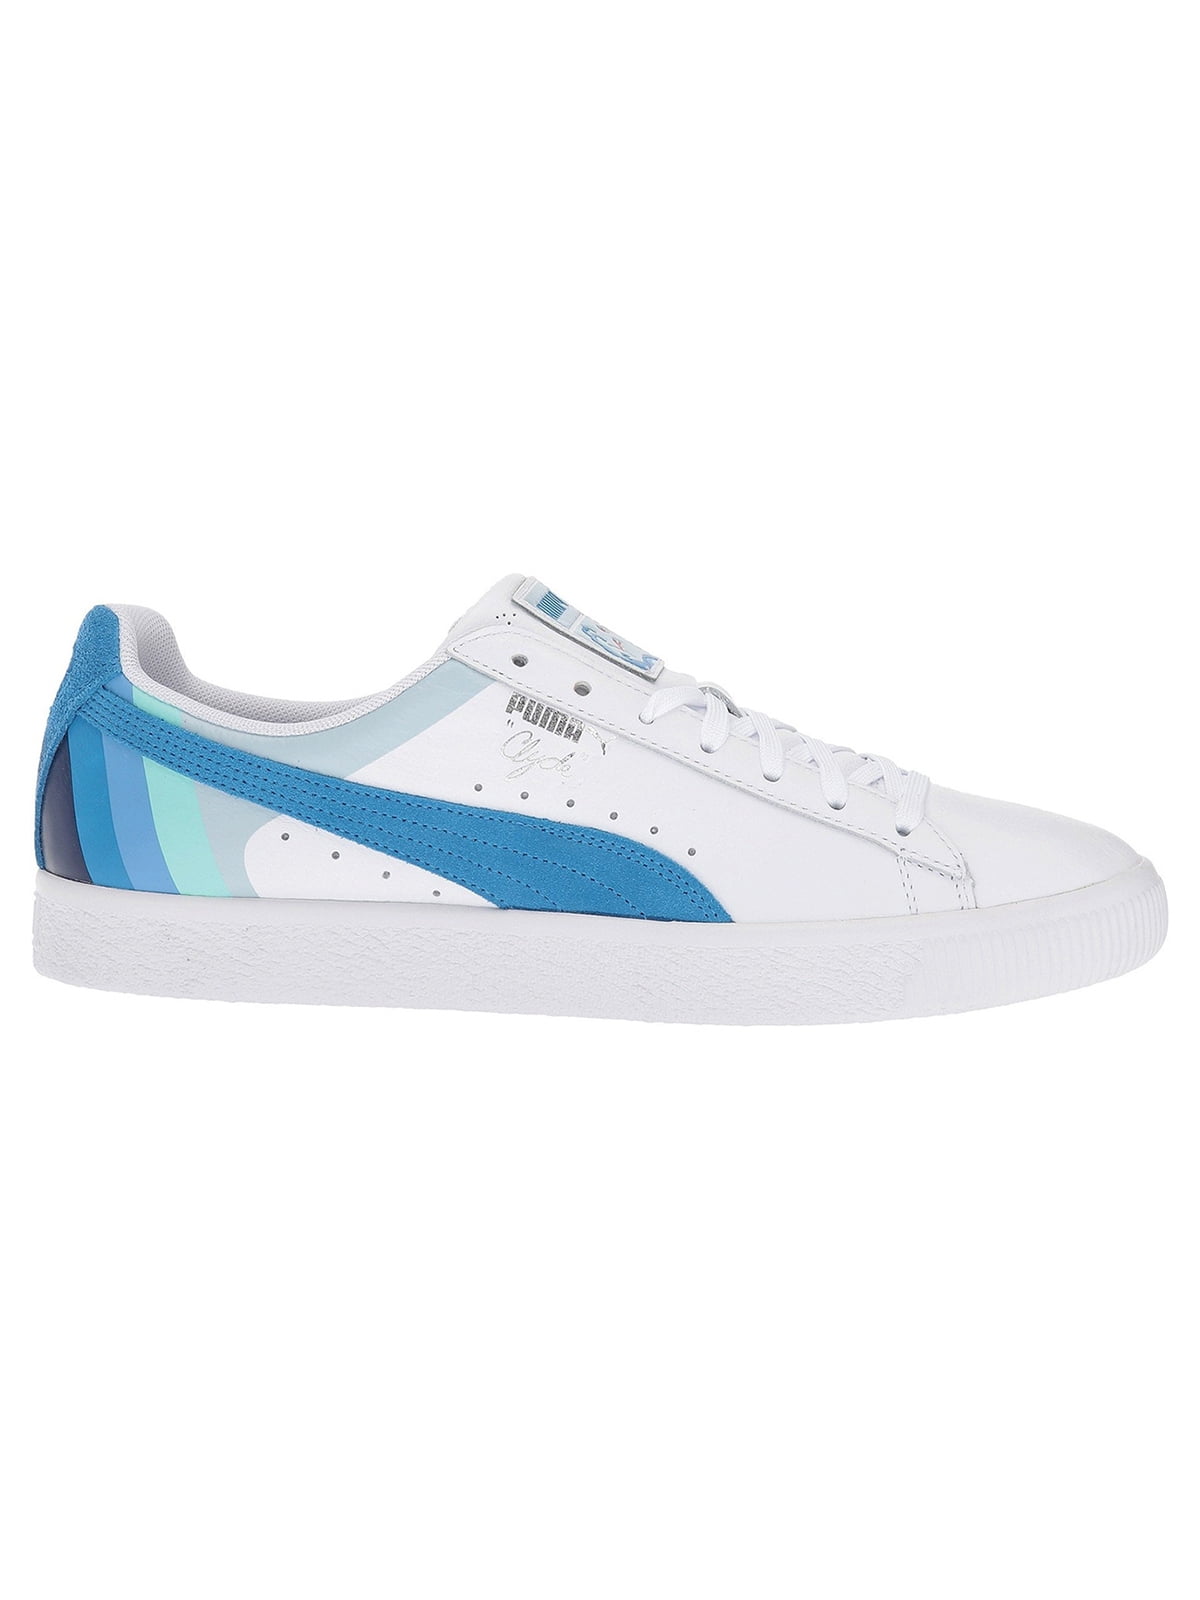 pink dolphin pumas blue